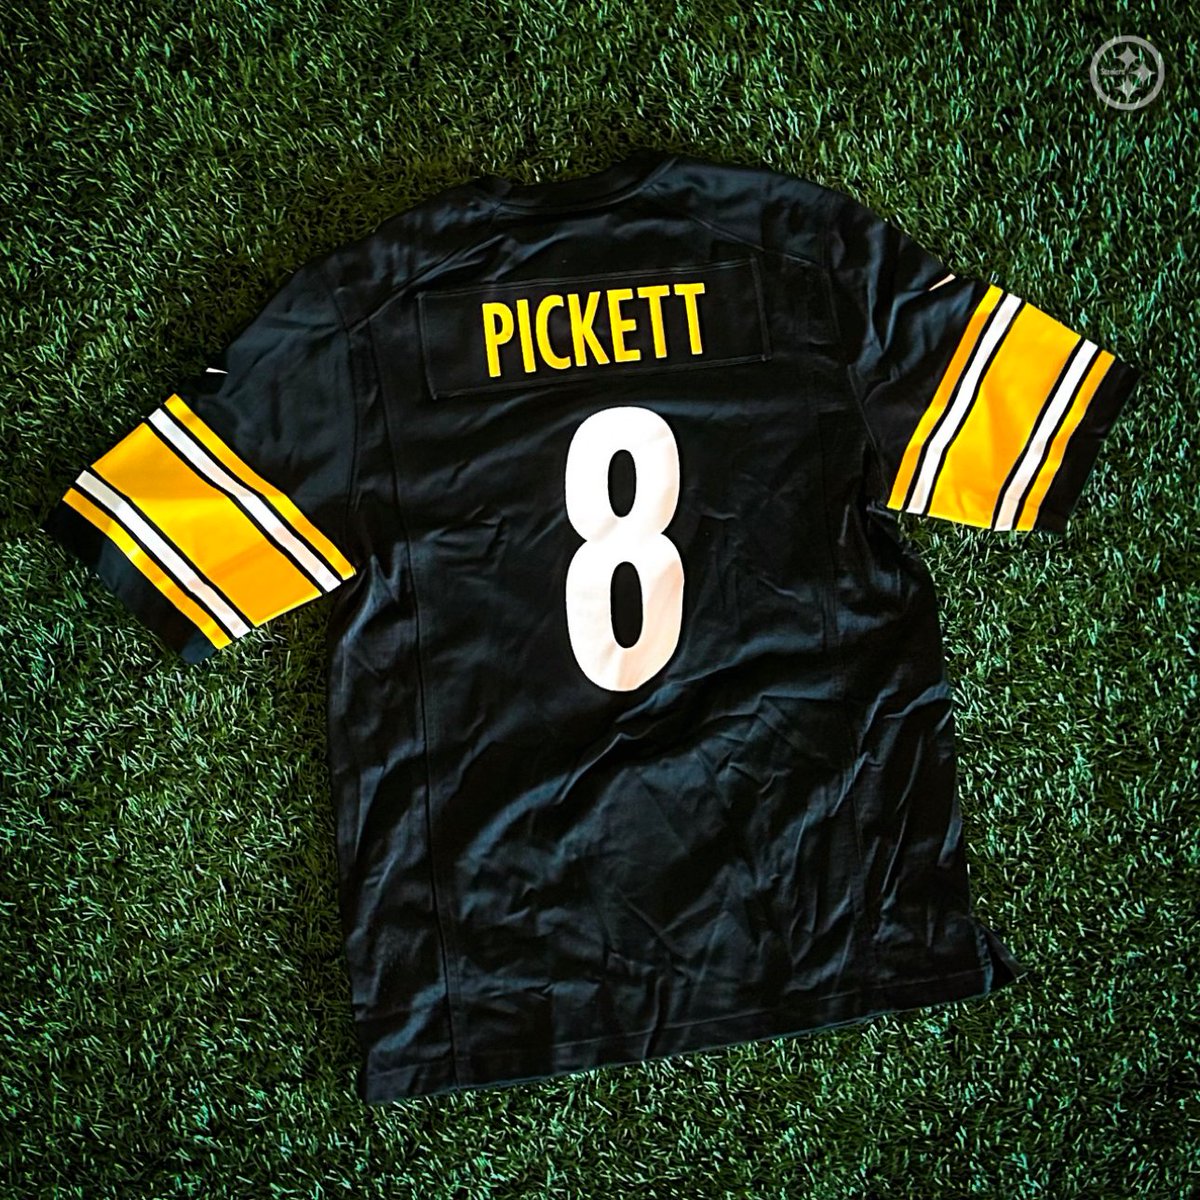 Who wants a @kennypickett10 jersey for #412Day⁉️ RT for your chance to win 🔁